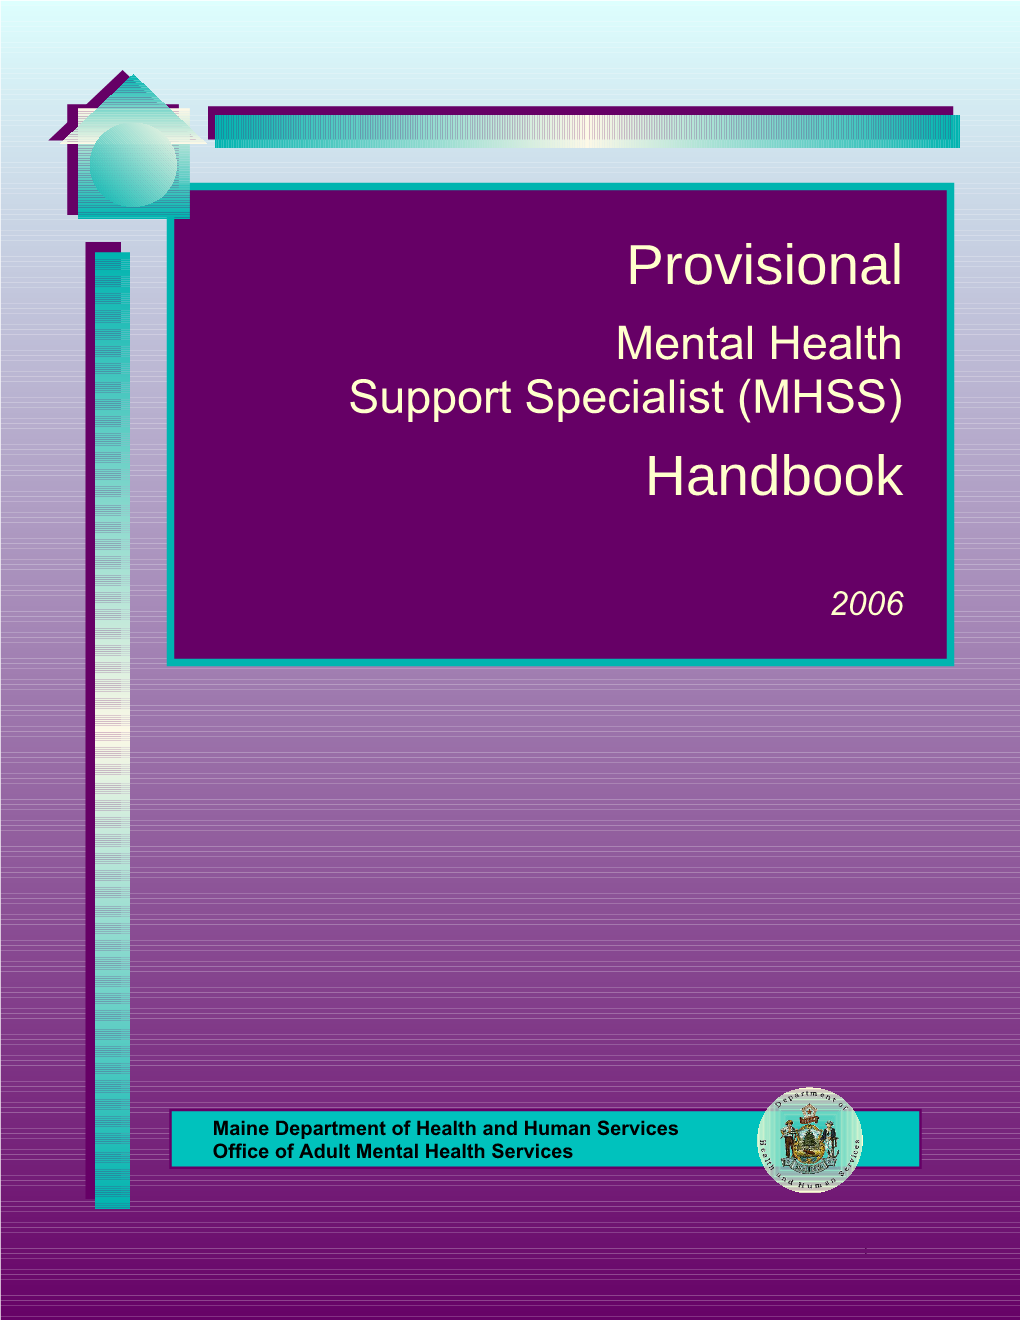 Office of Adult Mental Health Services